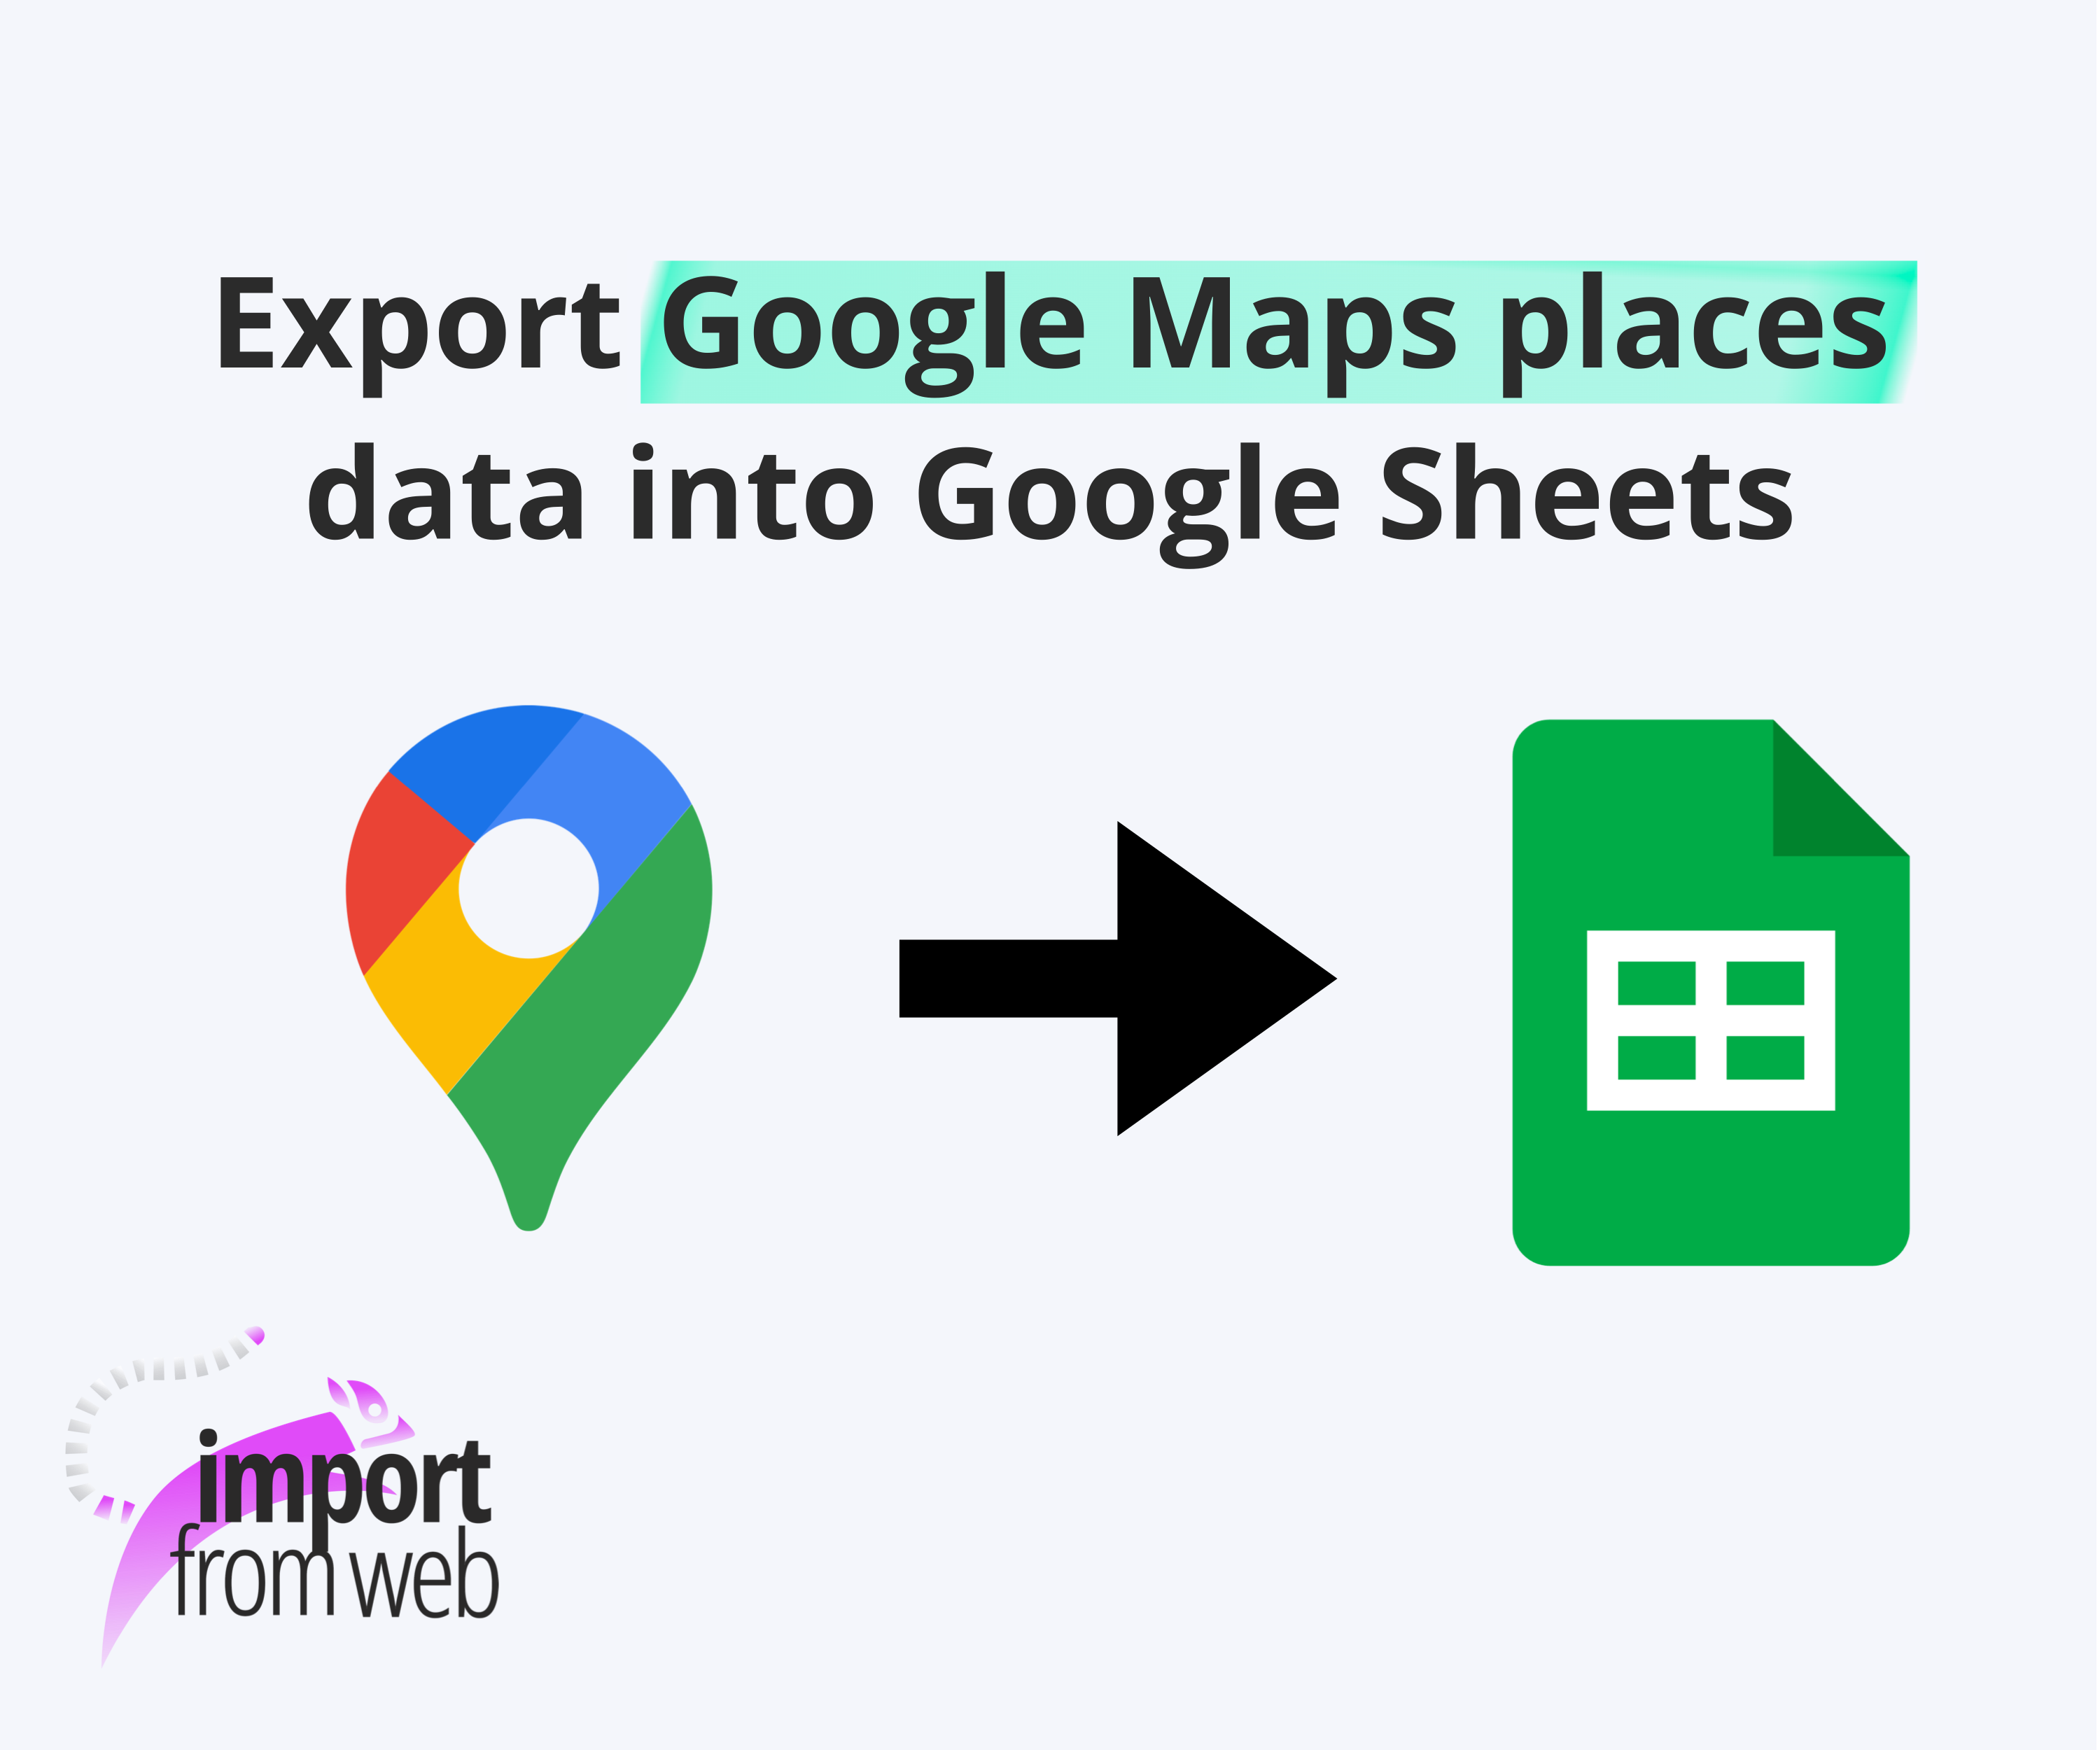 Export Google Maps places data into Google Sheets